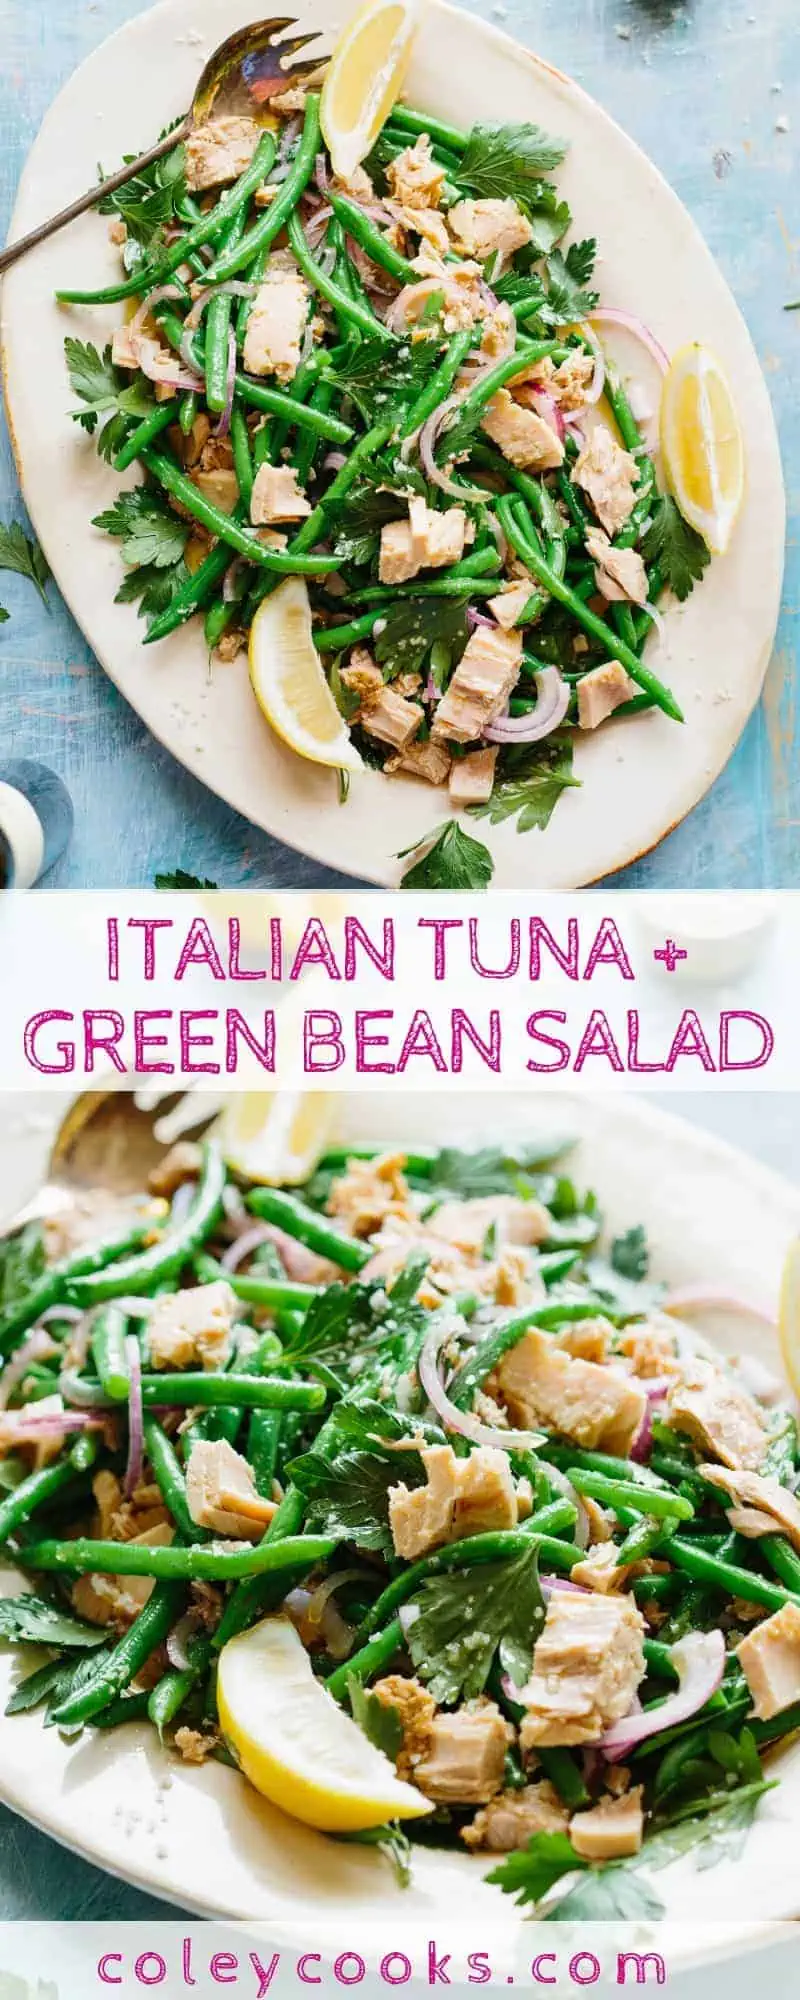 ITALIAN TUNA + GREEN BEAN SALAD | This recipe is so simple it's barely even a recipe! Low carb, high protein, light, refreshing delicious green bean and Italian tuna salad! #Italian #tuna #easy #greenbean #salad #recipe | ColeyCooks.com